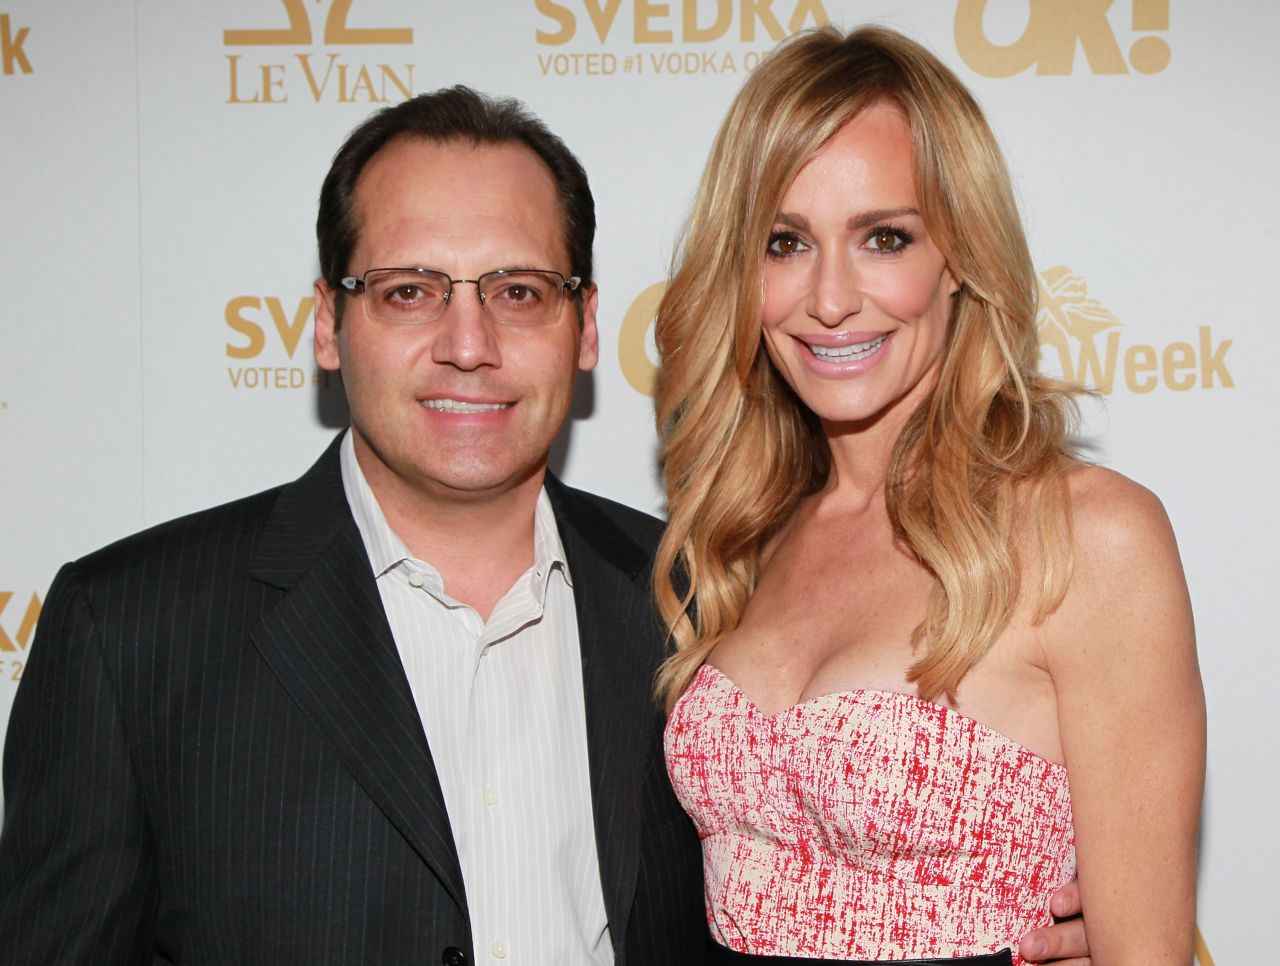 In August, fans of "The Real Housewives of Beverly Hills" were shocked to learn that the estranged husband of housewife Taylor Armstrong had committed suicide by hanging, at the age of 47. The tragedy struck in the midst of promotion for the reality show's new season, which had planned to highlight the couple's failing marriage, and shifted the attention of viewers from the women's catty fighting to a different kind of reality. The warning signs of suicide are often recognized only in hindsight. If you know someone who seems depressed and despondent, you should be aware of the red flags and take action if necessary, so no one is left asking "what if."